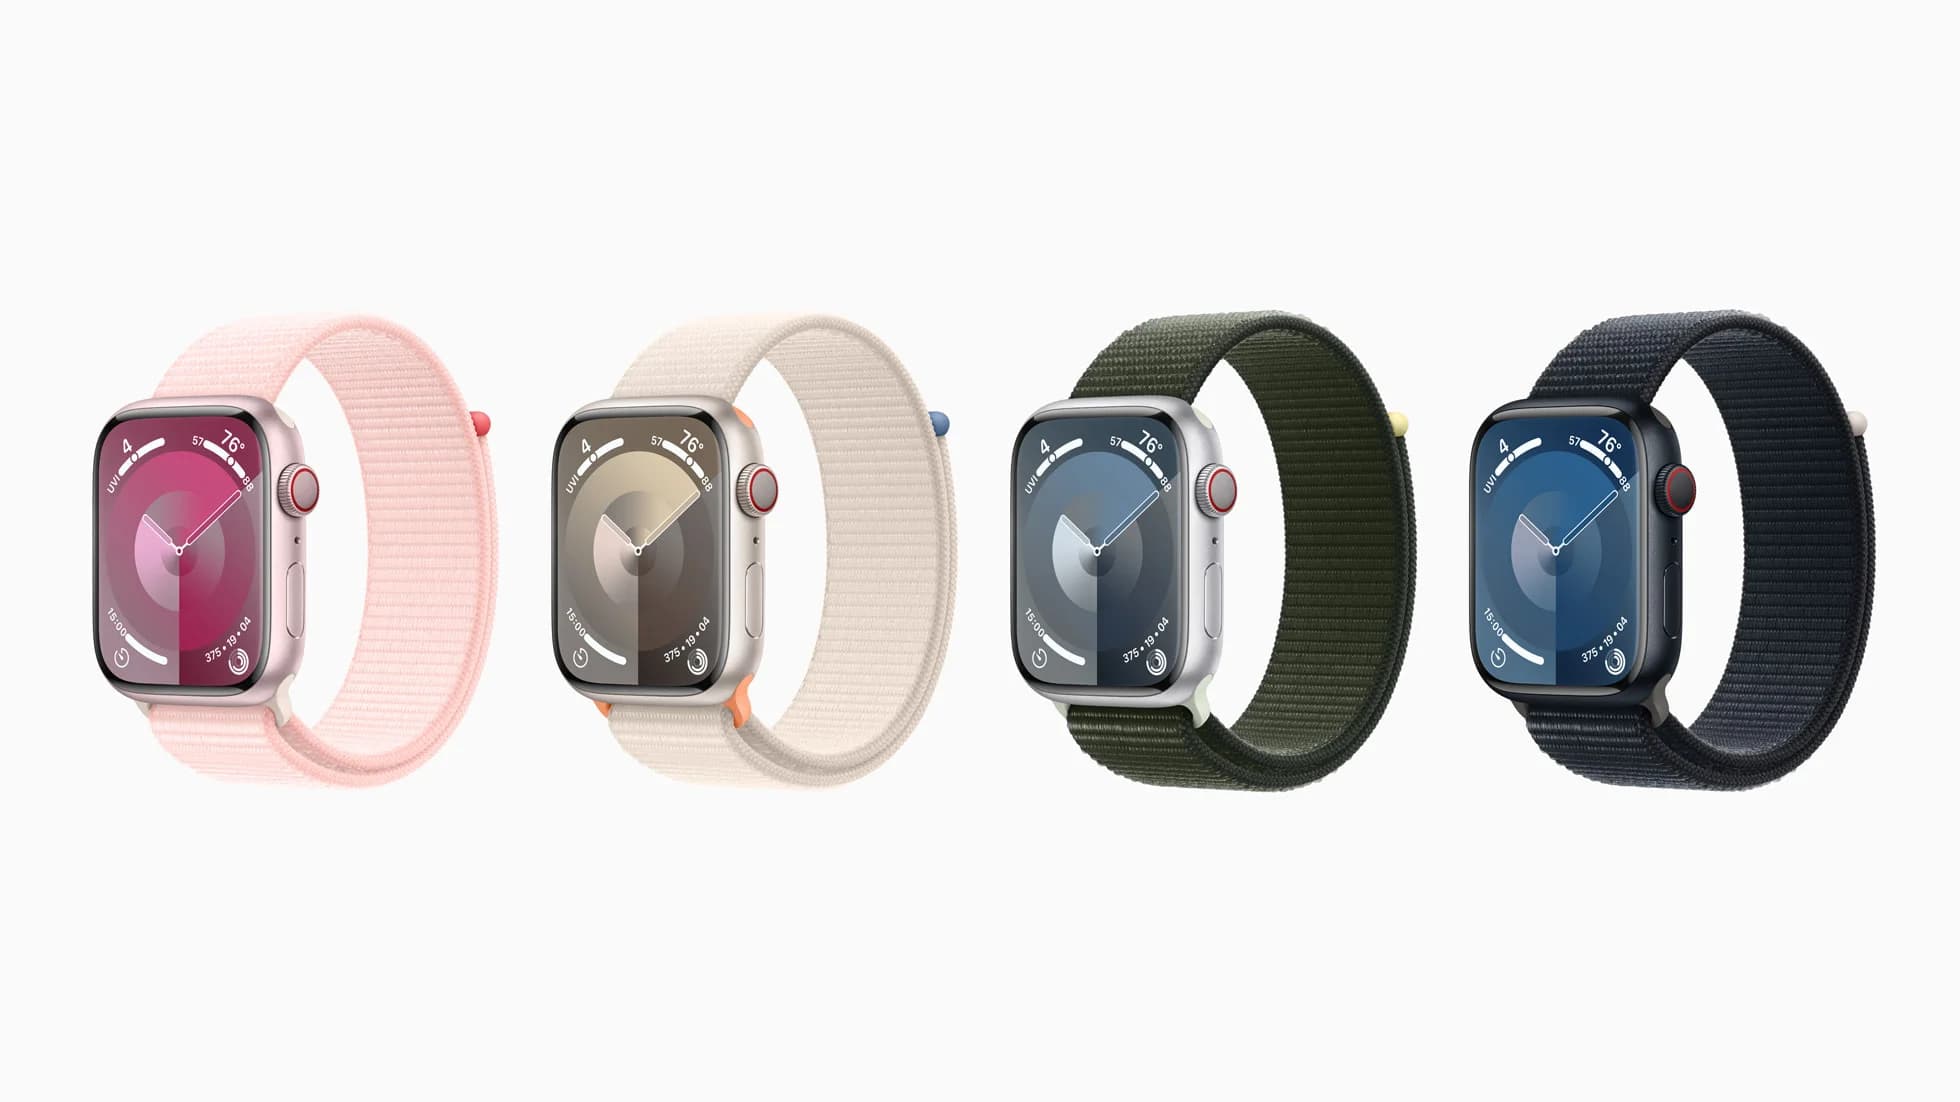 Apple watches in different colour combinations